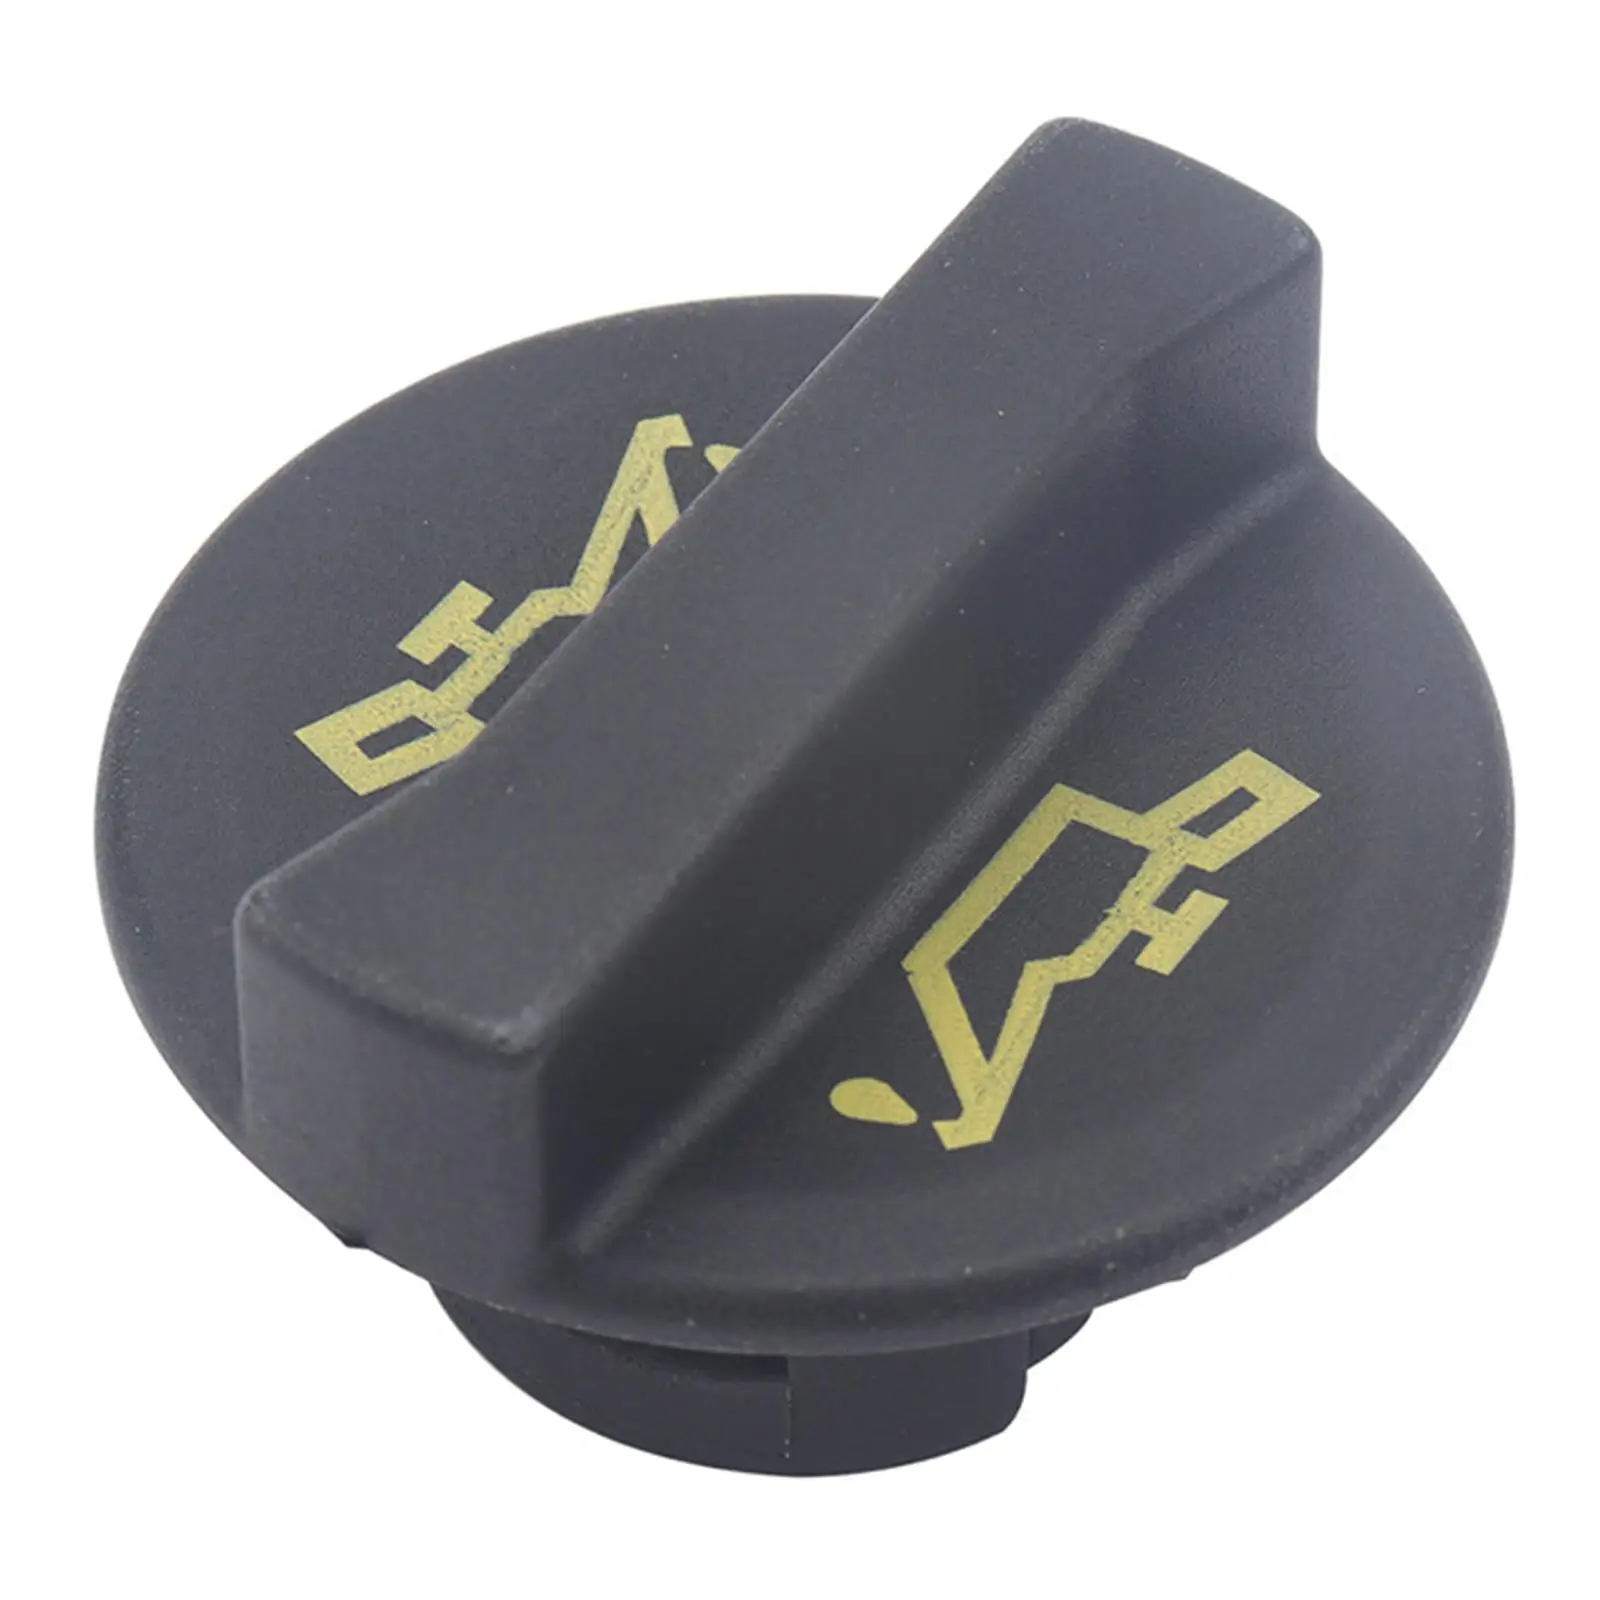  Caps Cover, Ys4G6766AA Direct Replaces, Accessories, 9662149180 Fuel Petrol Tank Caps Fit  Transit MK04134110 1180.R1